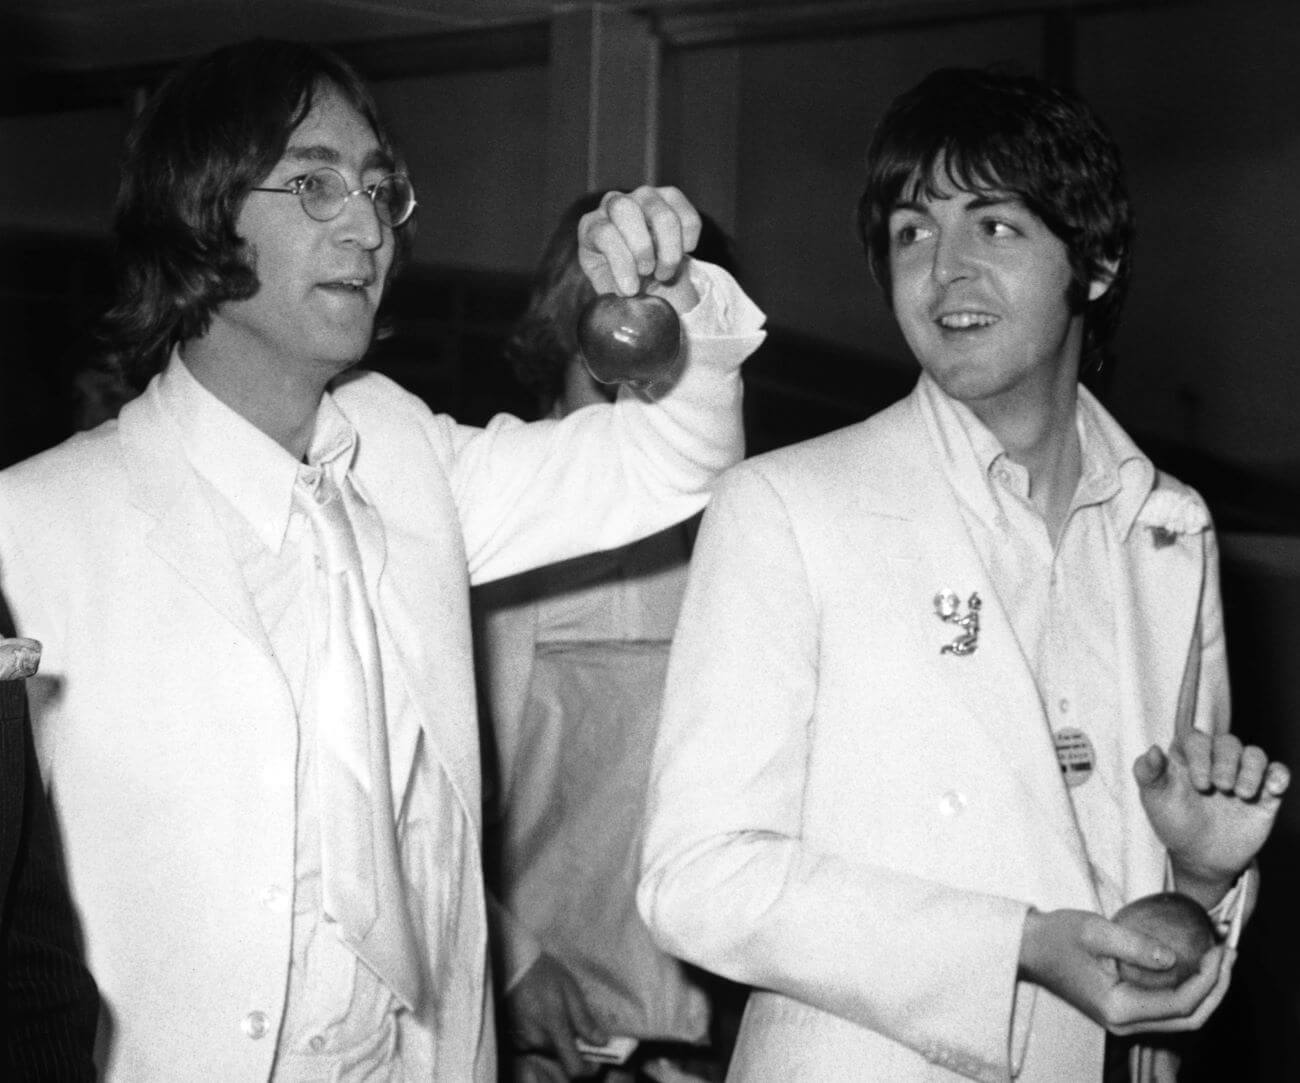 A black and white picture of John Lennon and Paul McCartney wearing white and holding apples.